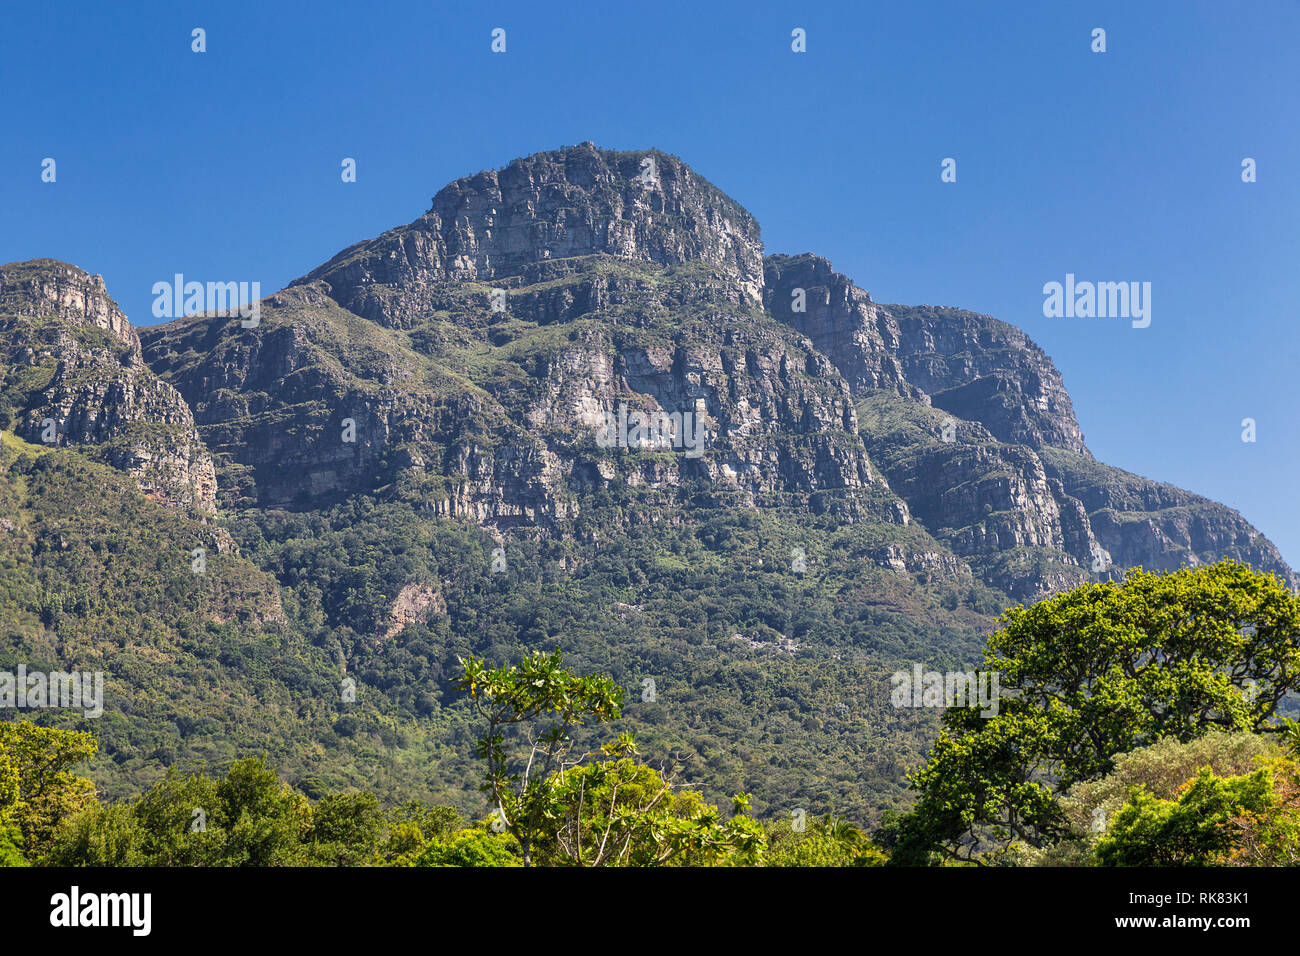 Kirstenbosch botanical garden trees and mountains view in Cape Town, South Africa Stock Photo